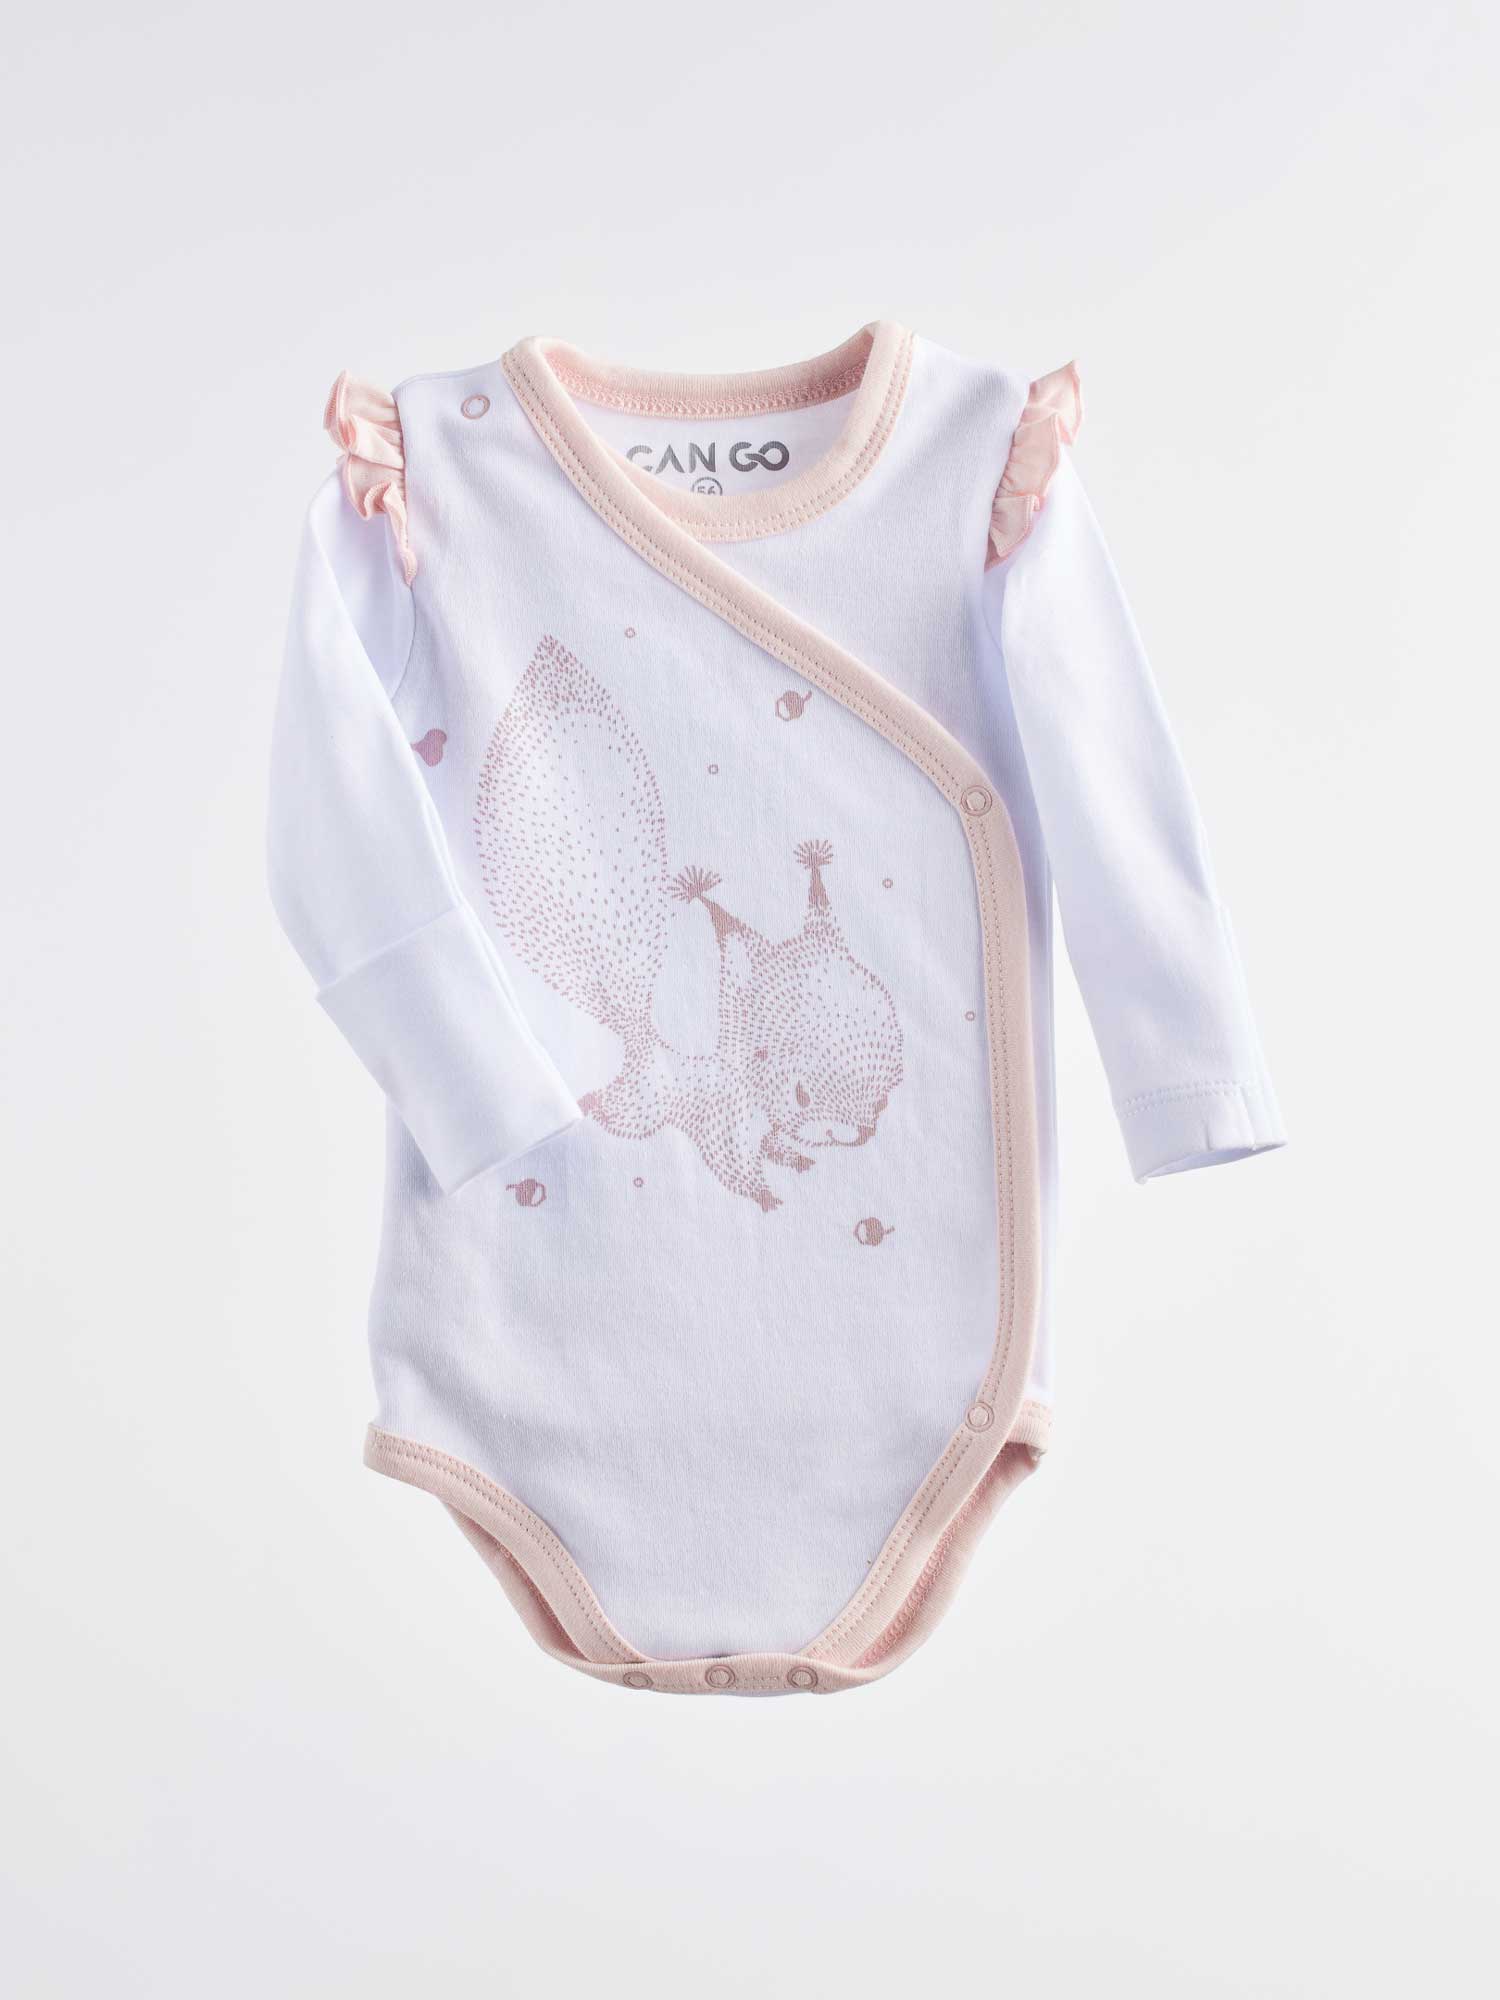 Infant bodysuit with cute squirrel grabbing nuts print, designed in warm and calm colors (white with pink contour) that make your baby feel comfortable and relaxed!